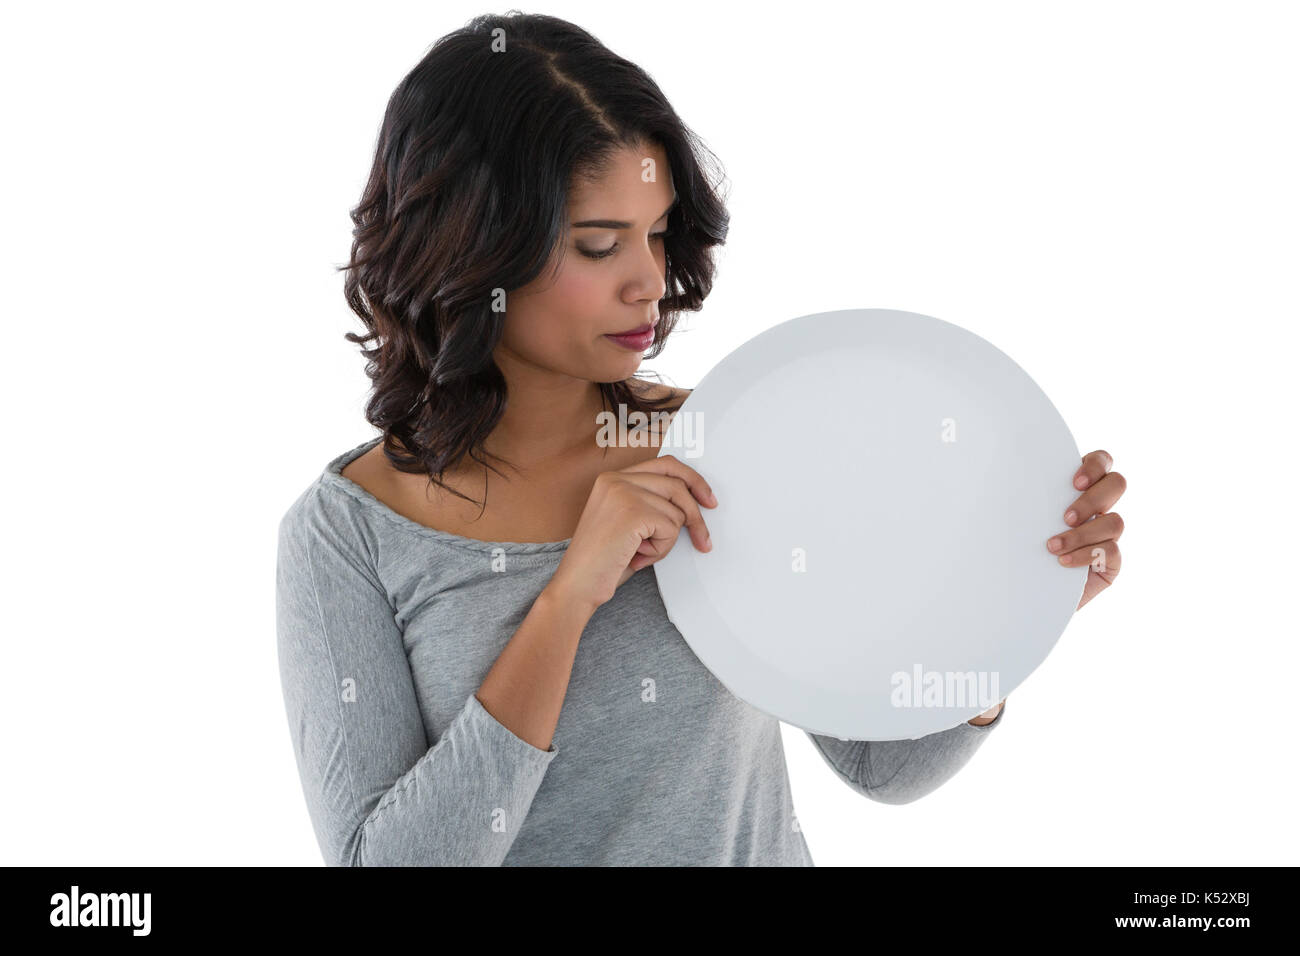 Young woman holding circle shaped placard over white background Stock Photo